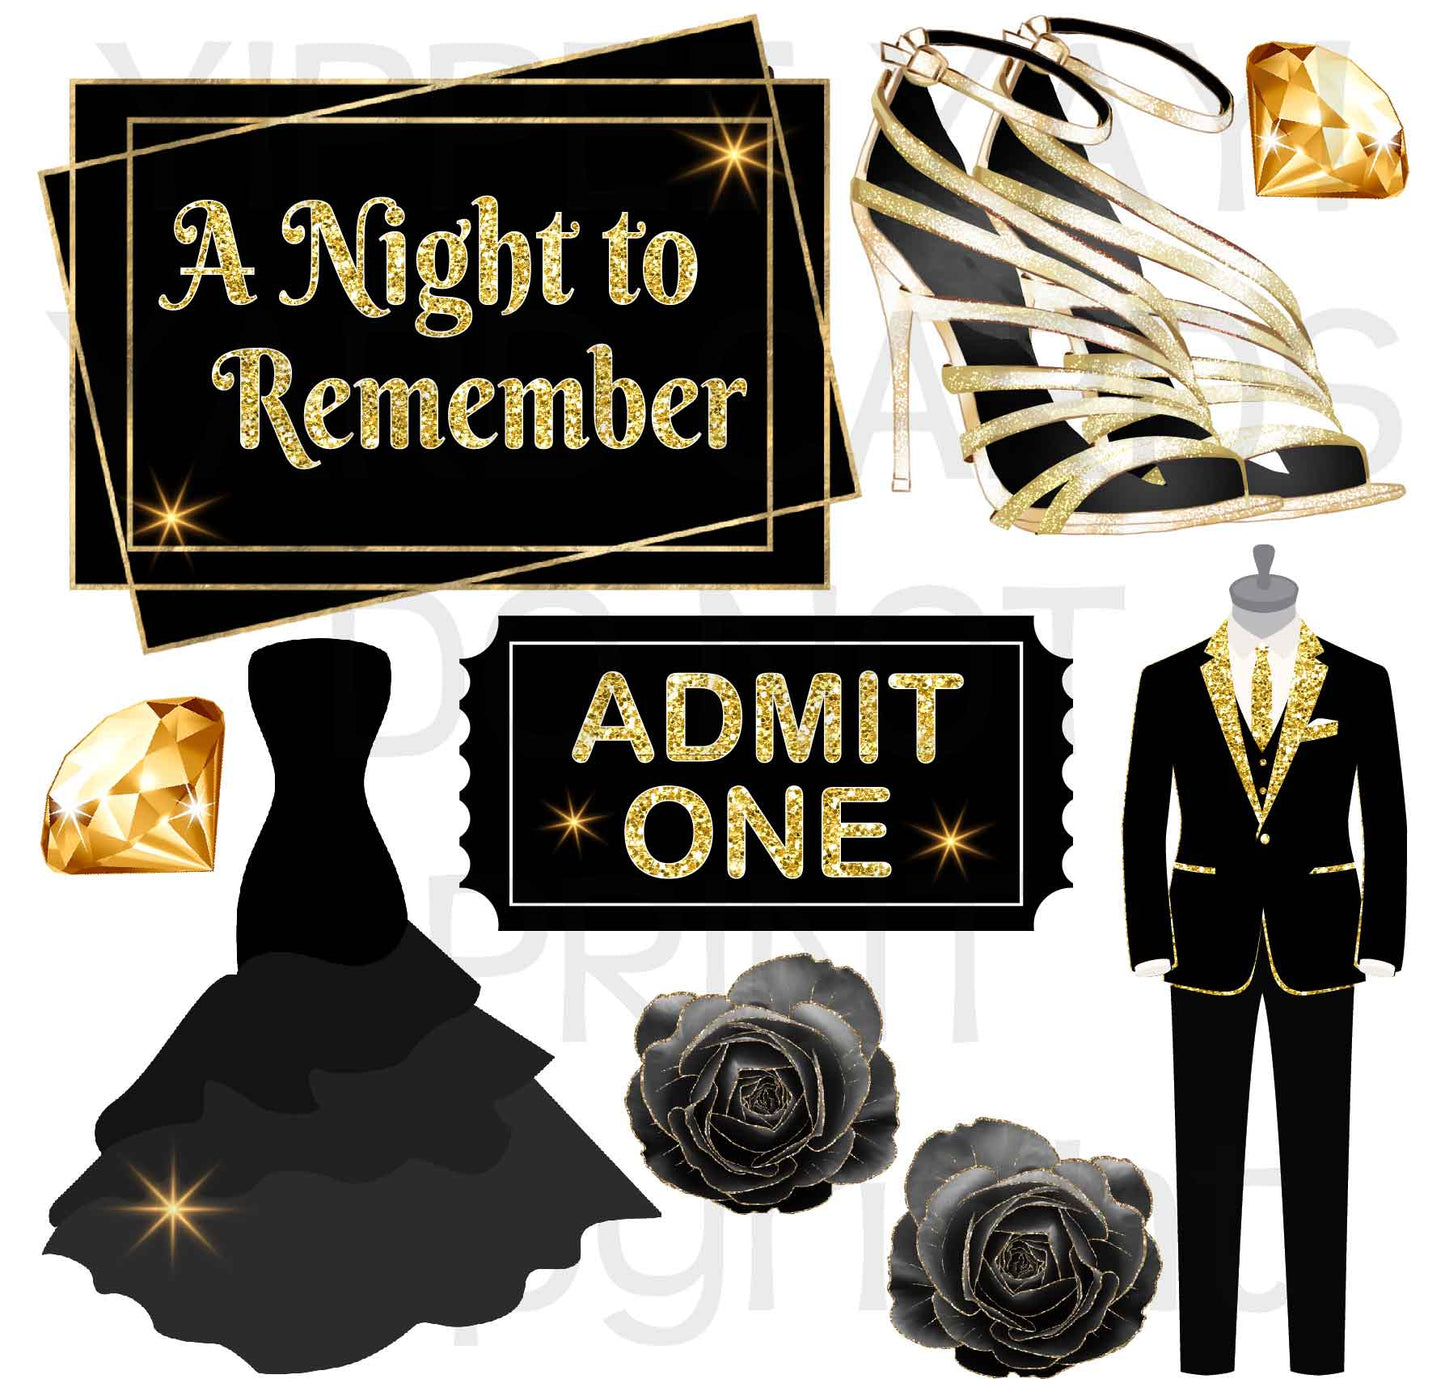 A Night to Remember - Gold and Black - Theme Half Sheet Misc. (Must Purchase 2 Half sheets - You Can Mix & Match)